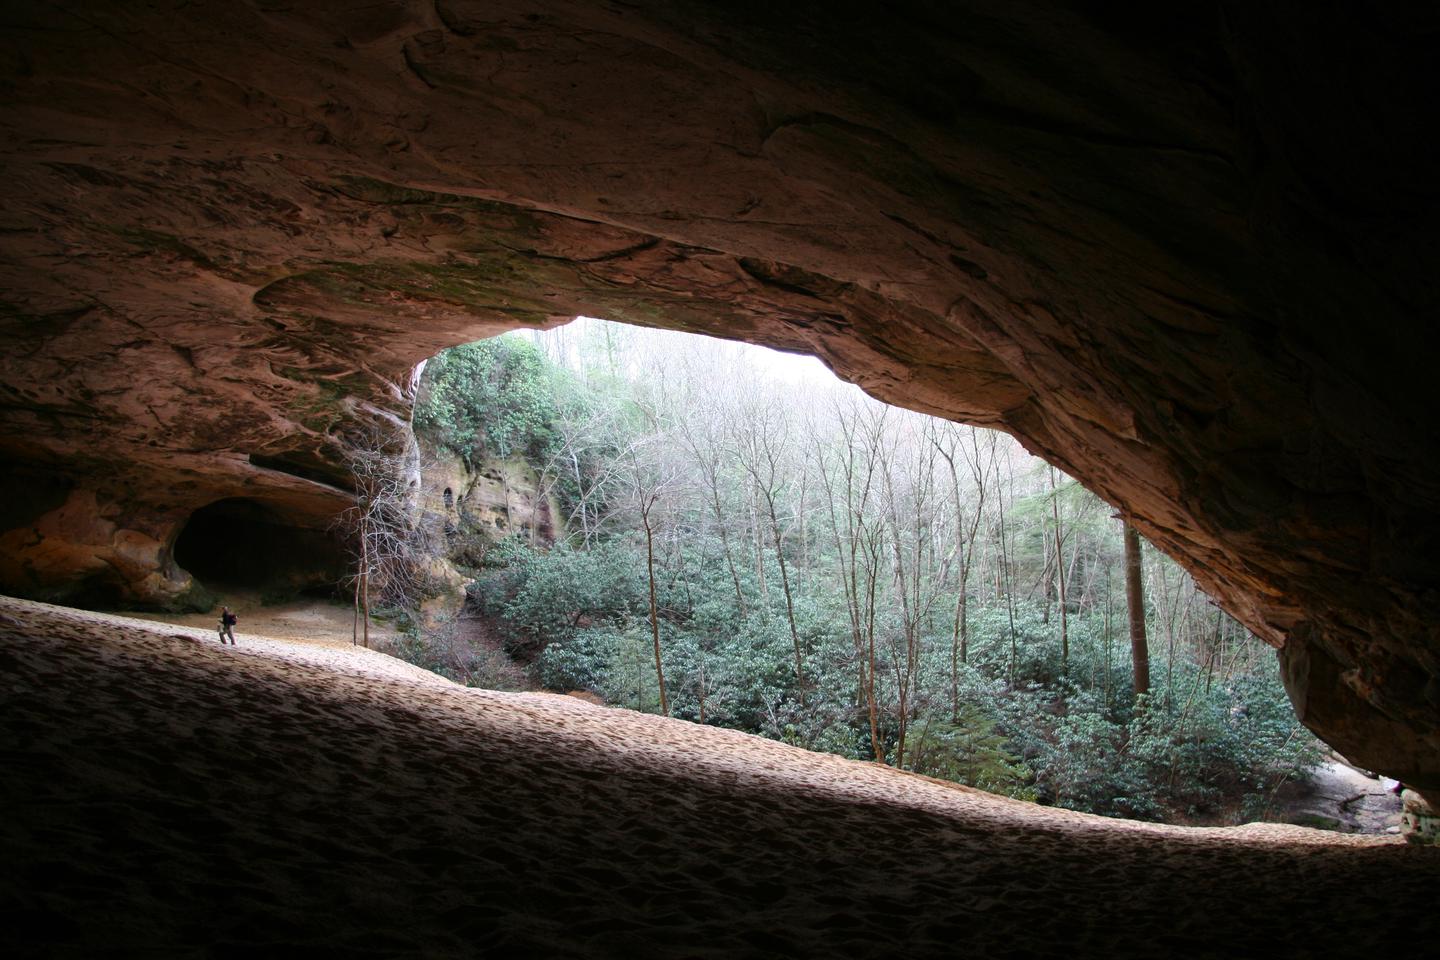 A man hikes in an enormous open cave with a sandy floor.Visiting Sand Cave, a massive sandstone rock shelter, involves hiking about 10 miles (16 km) round trip over moderate to strenuous terrain.